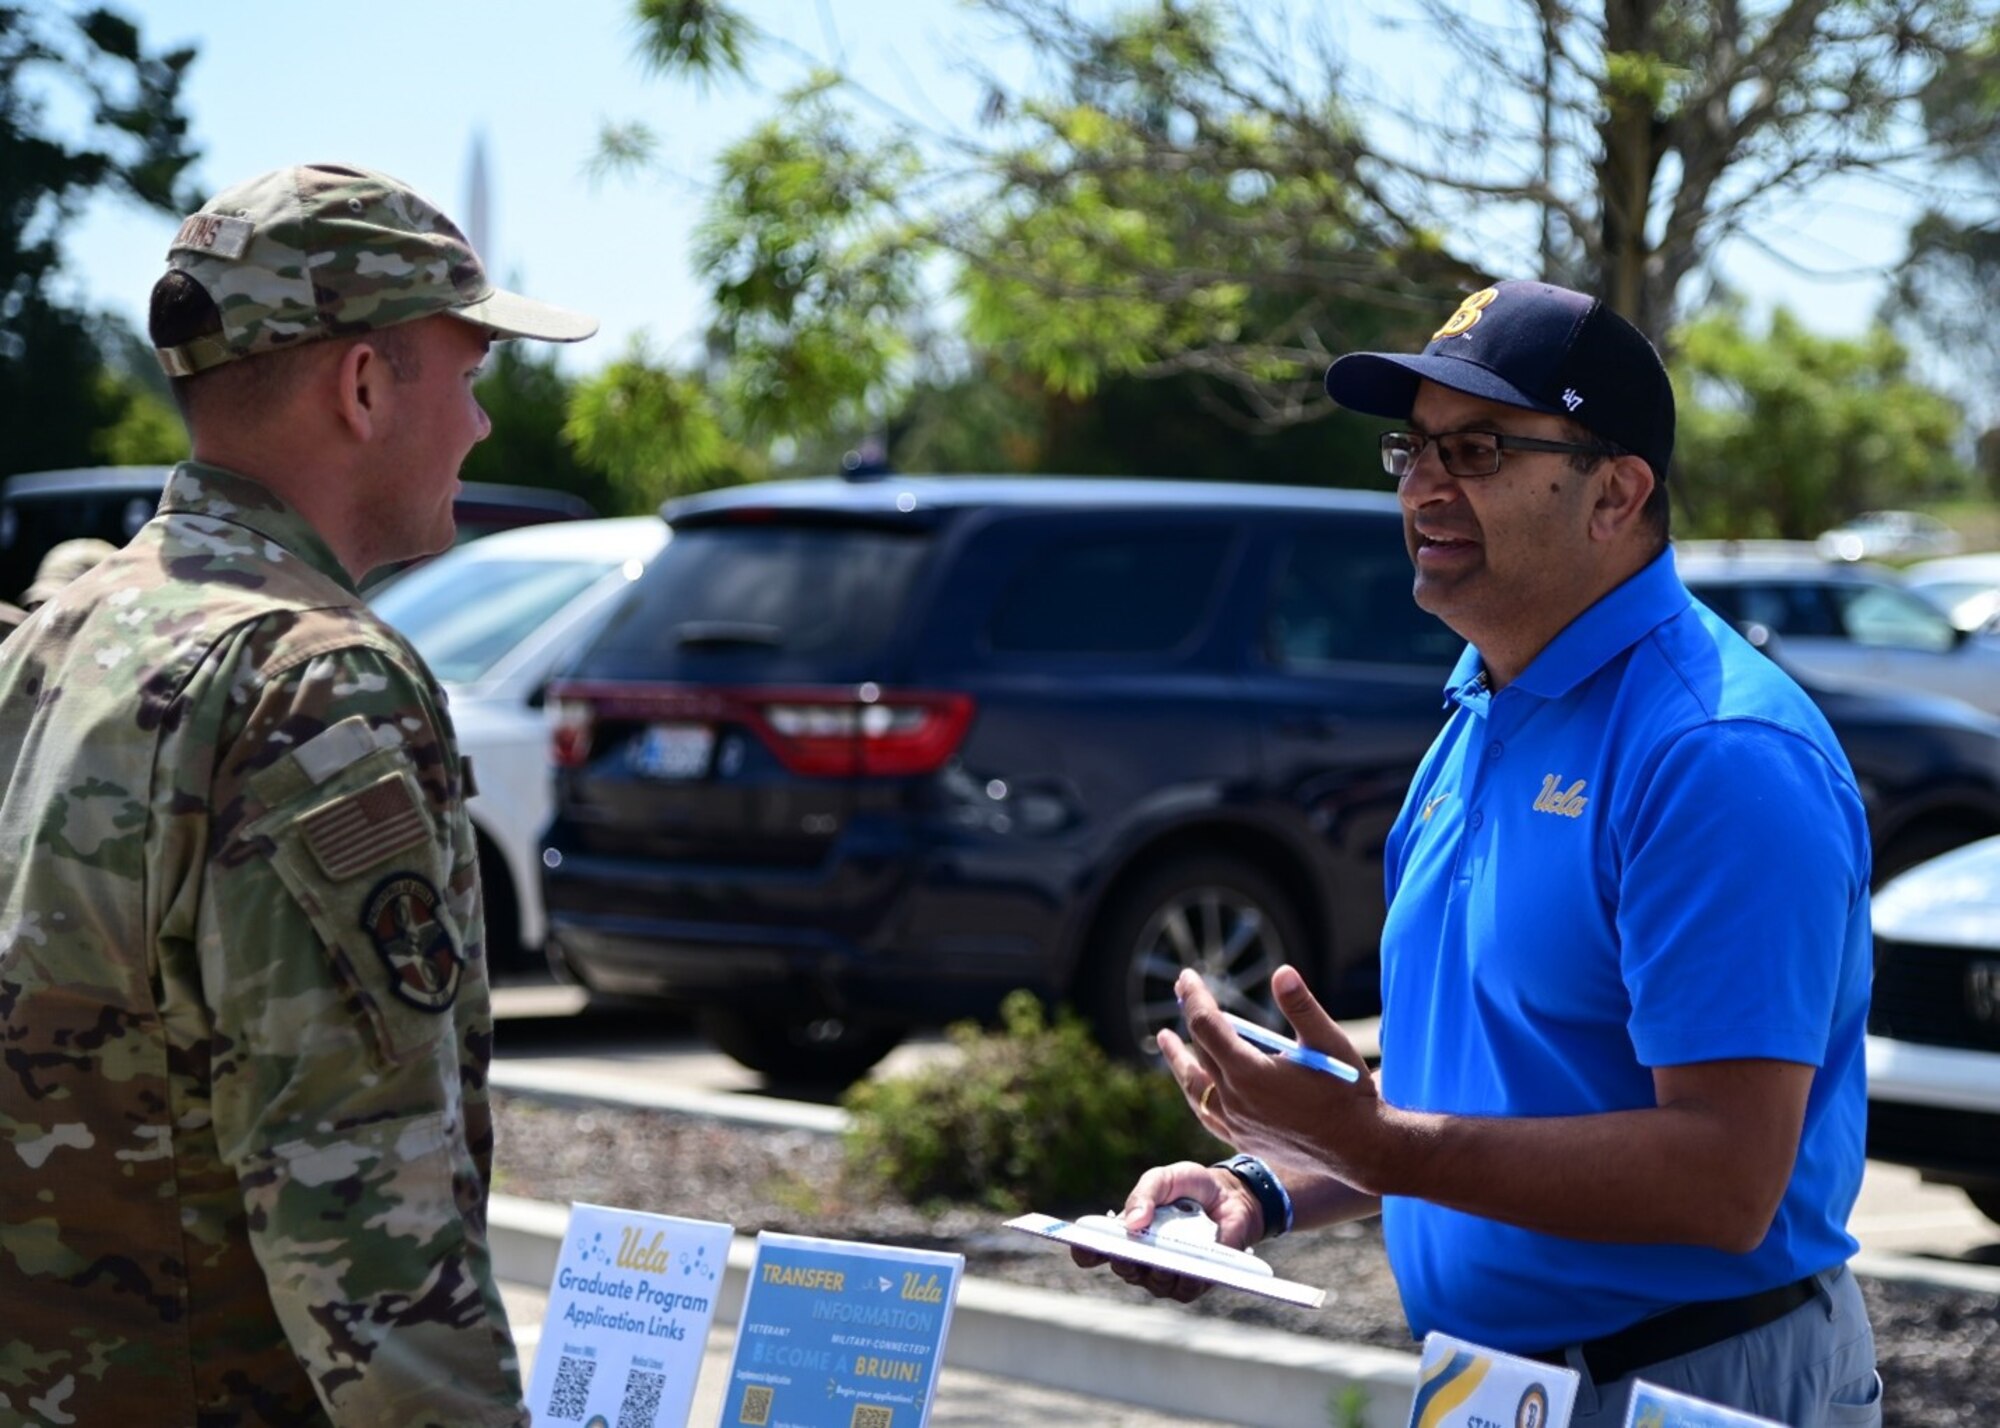 A man representing a university speaks to a man in a military uniform.